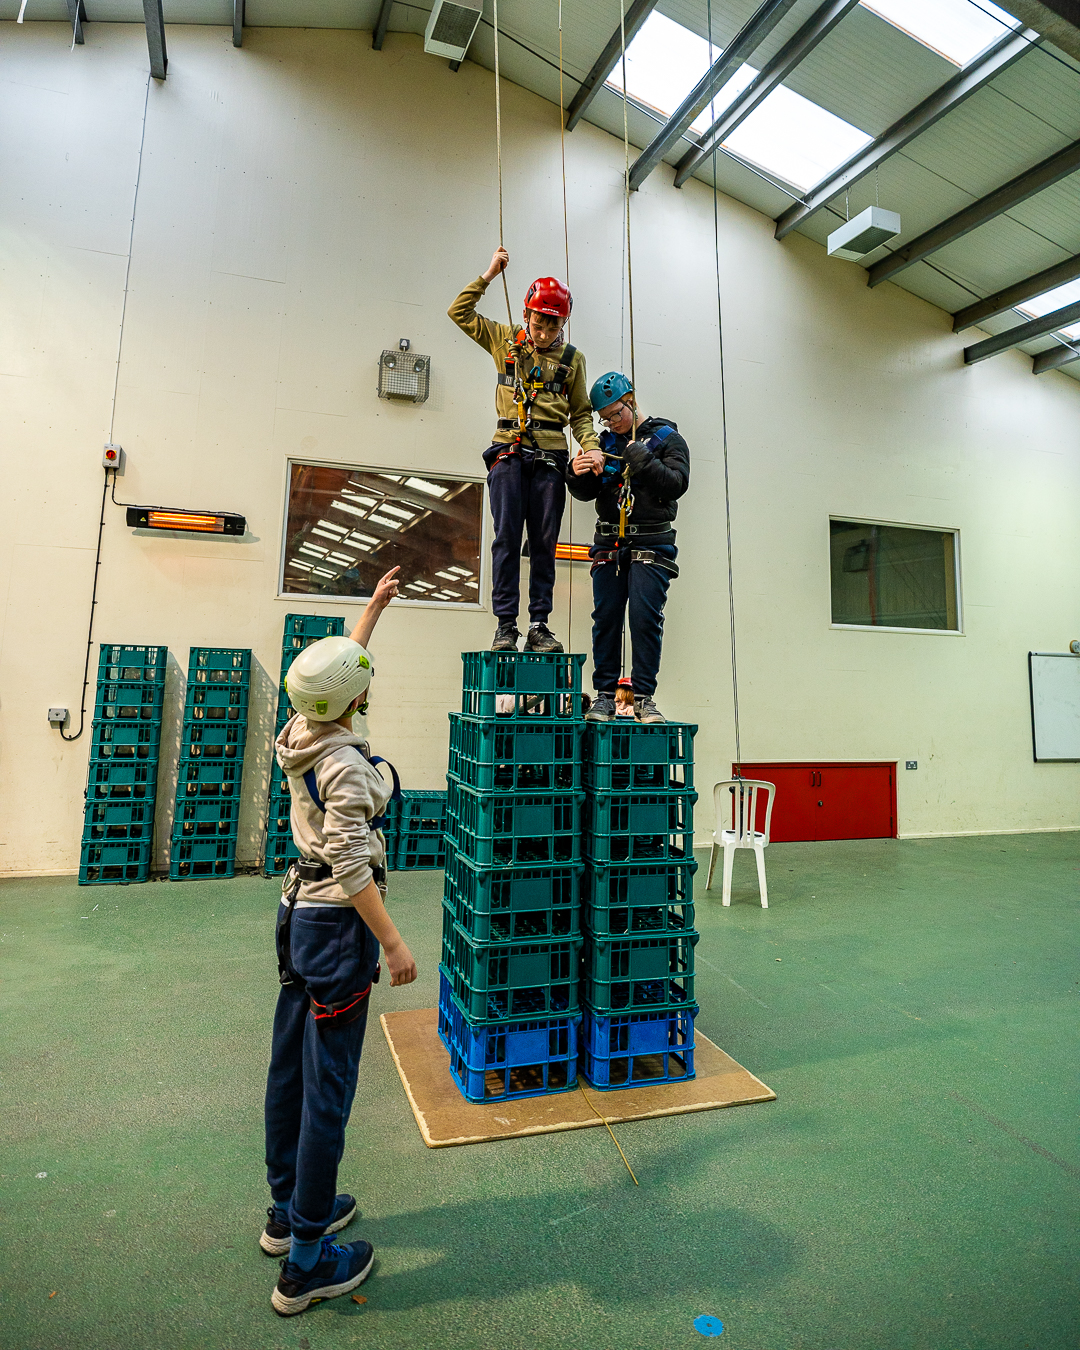 Two guests are standing on top of a tower of crates, attached by harnesses and ropes to the ceiling out of shot and they are looking down at a person standing on the floor who is pointing and directing them what to do.